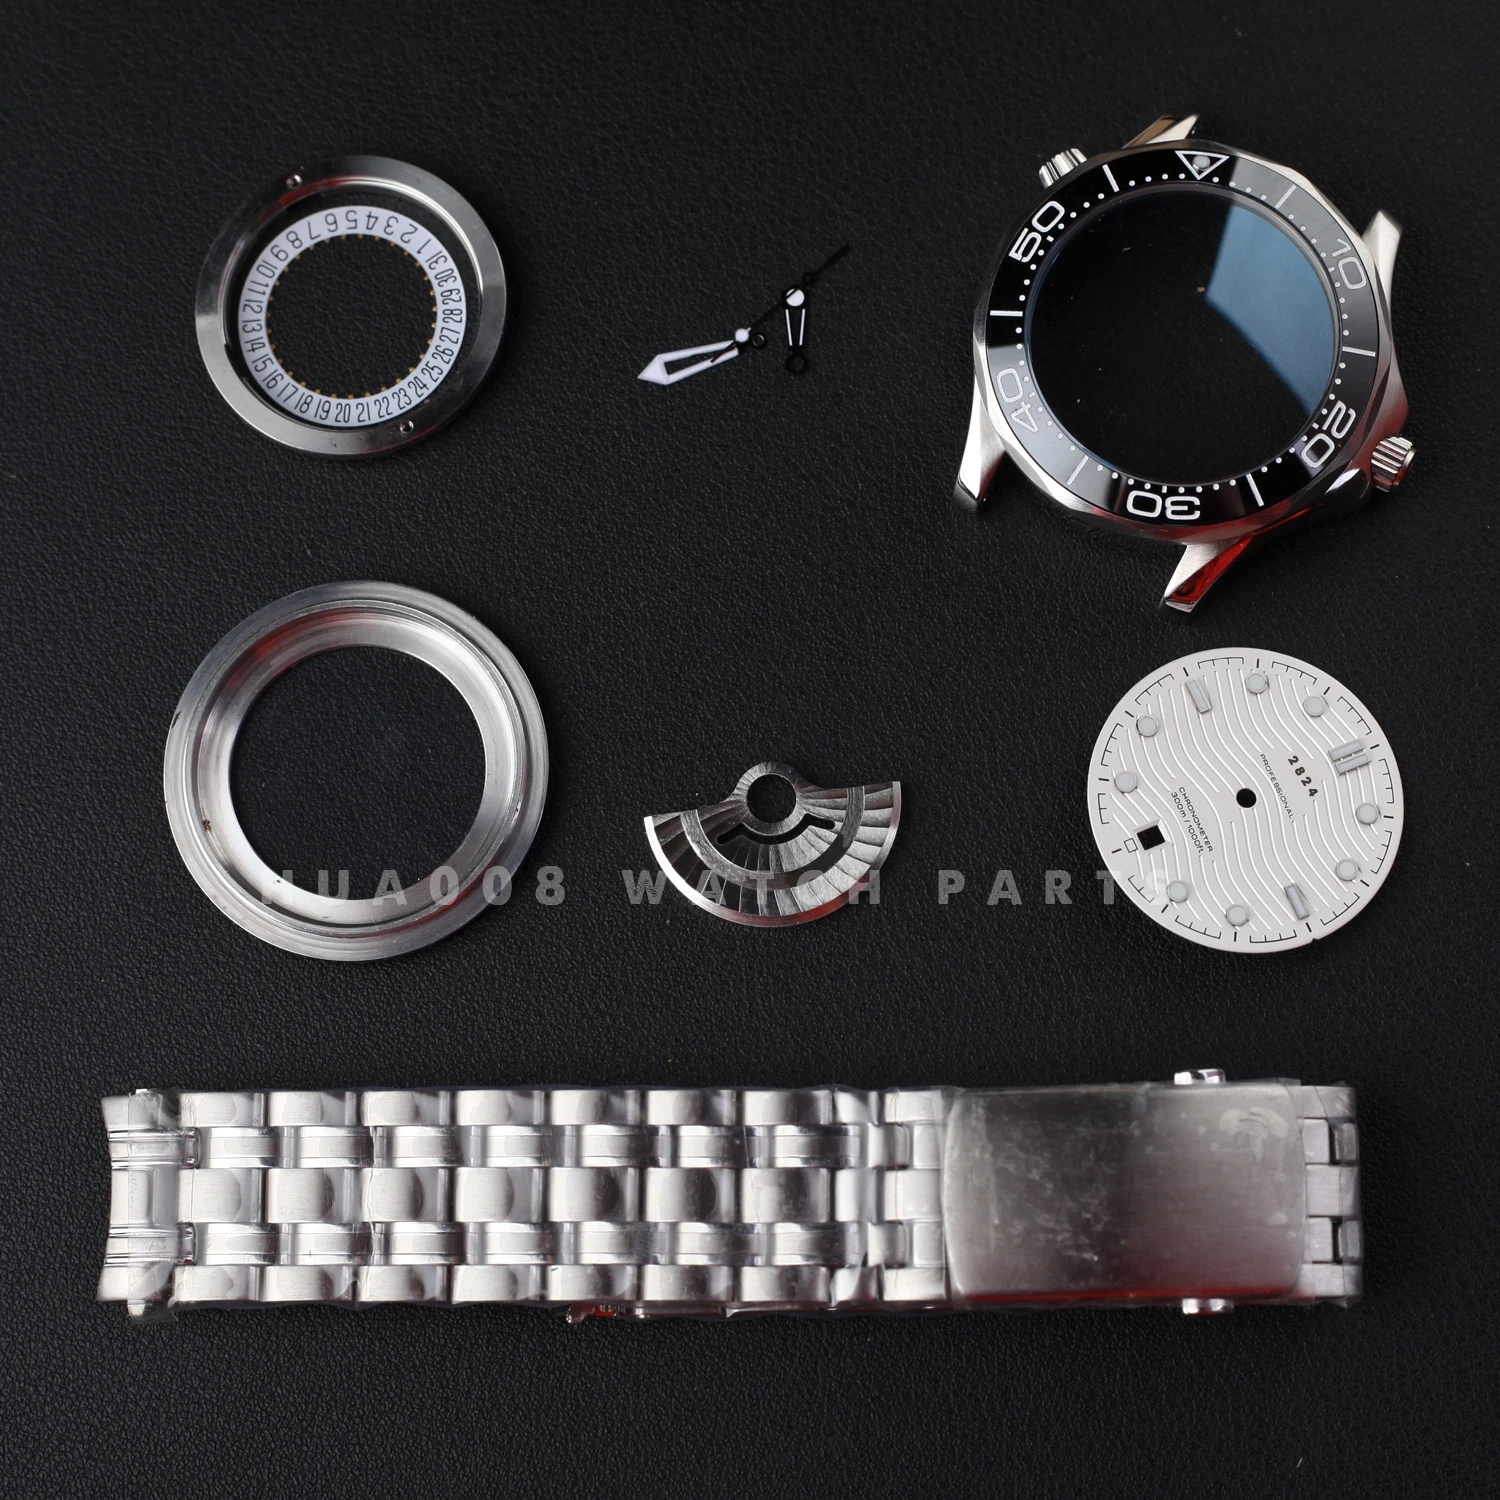 

stainsteel steel watch repair case kit FIT 2824 movement with date window for fix seamaster style case kit